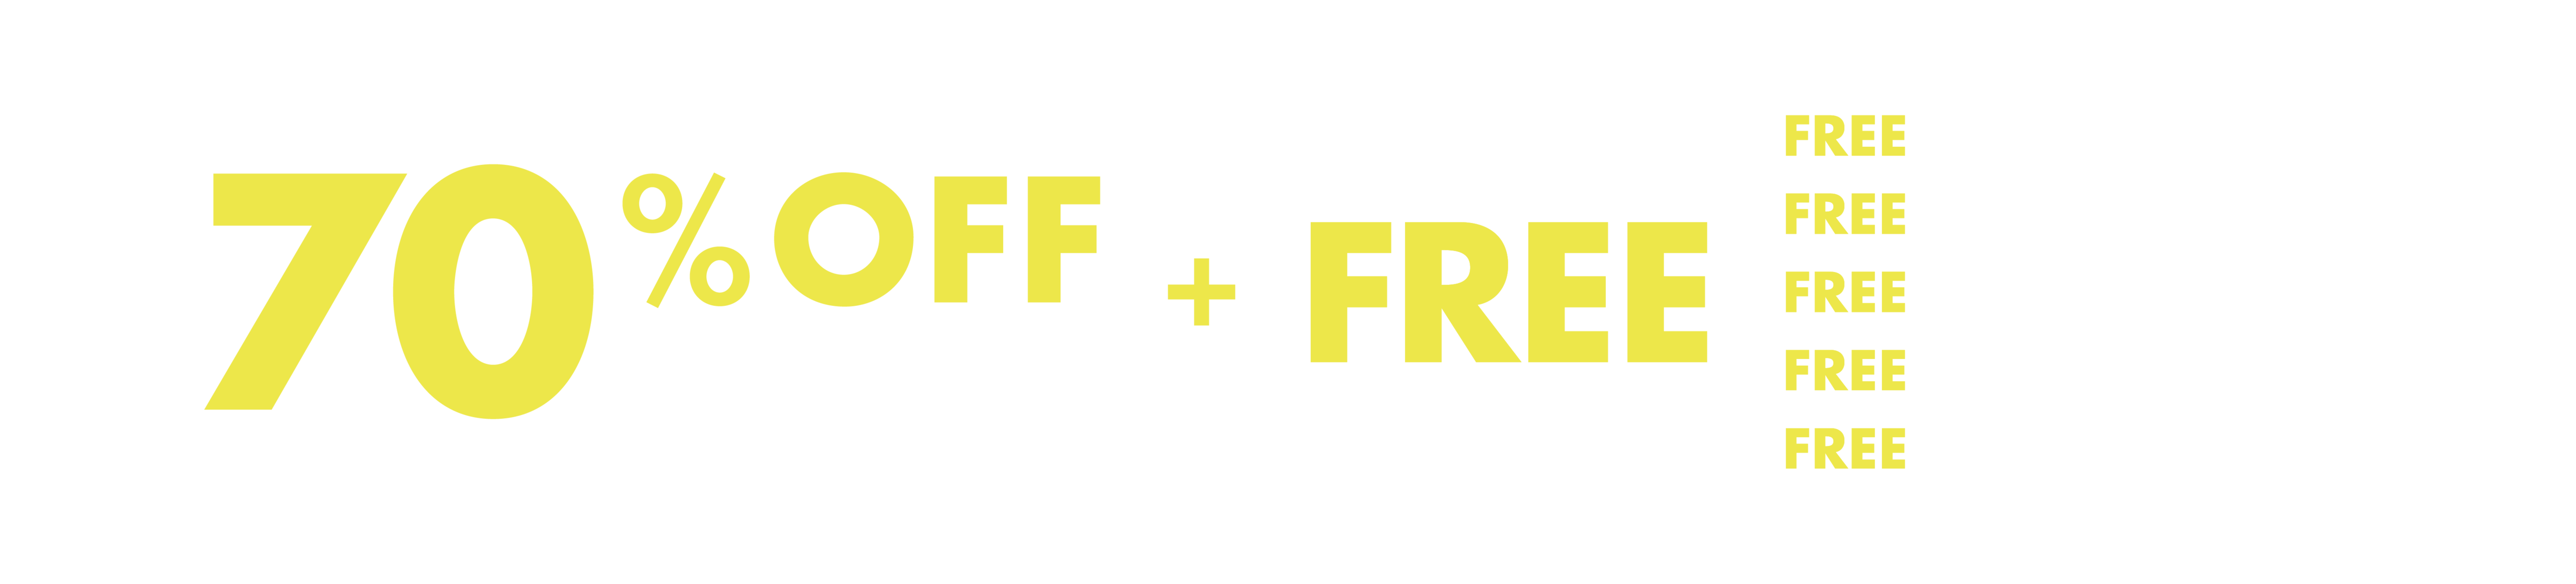 70% OFF 2ND GUEST + FAS/PICK 5 + OBC